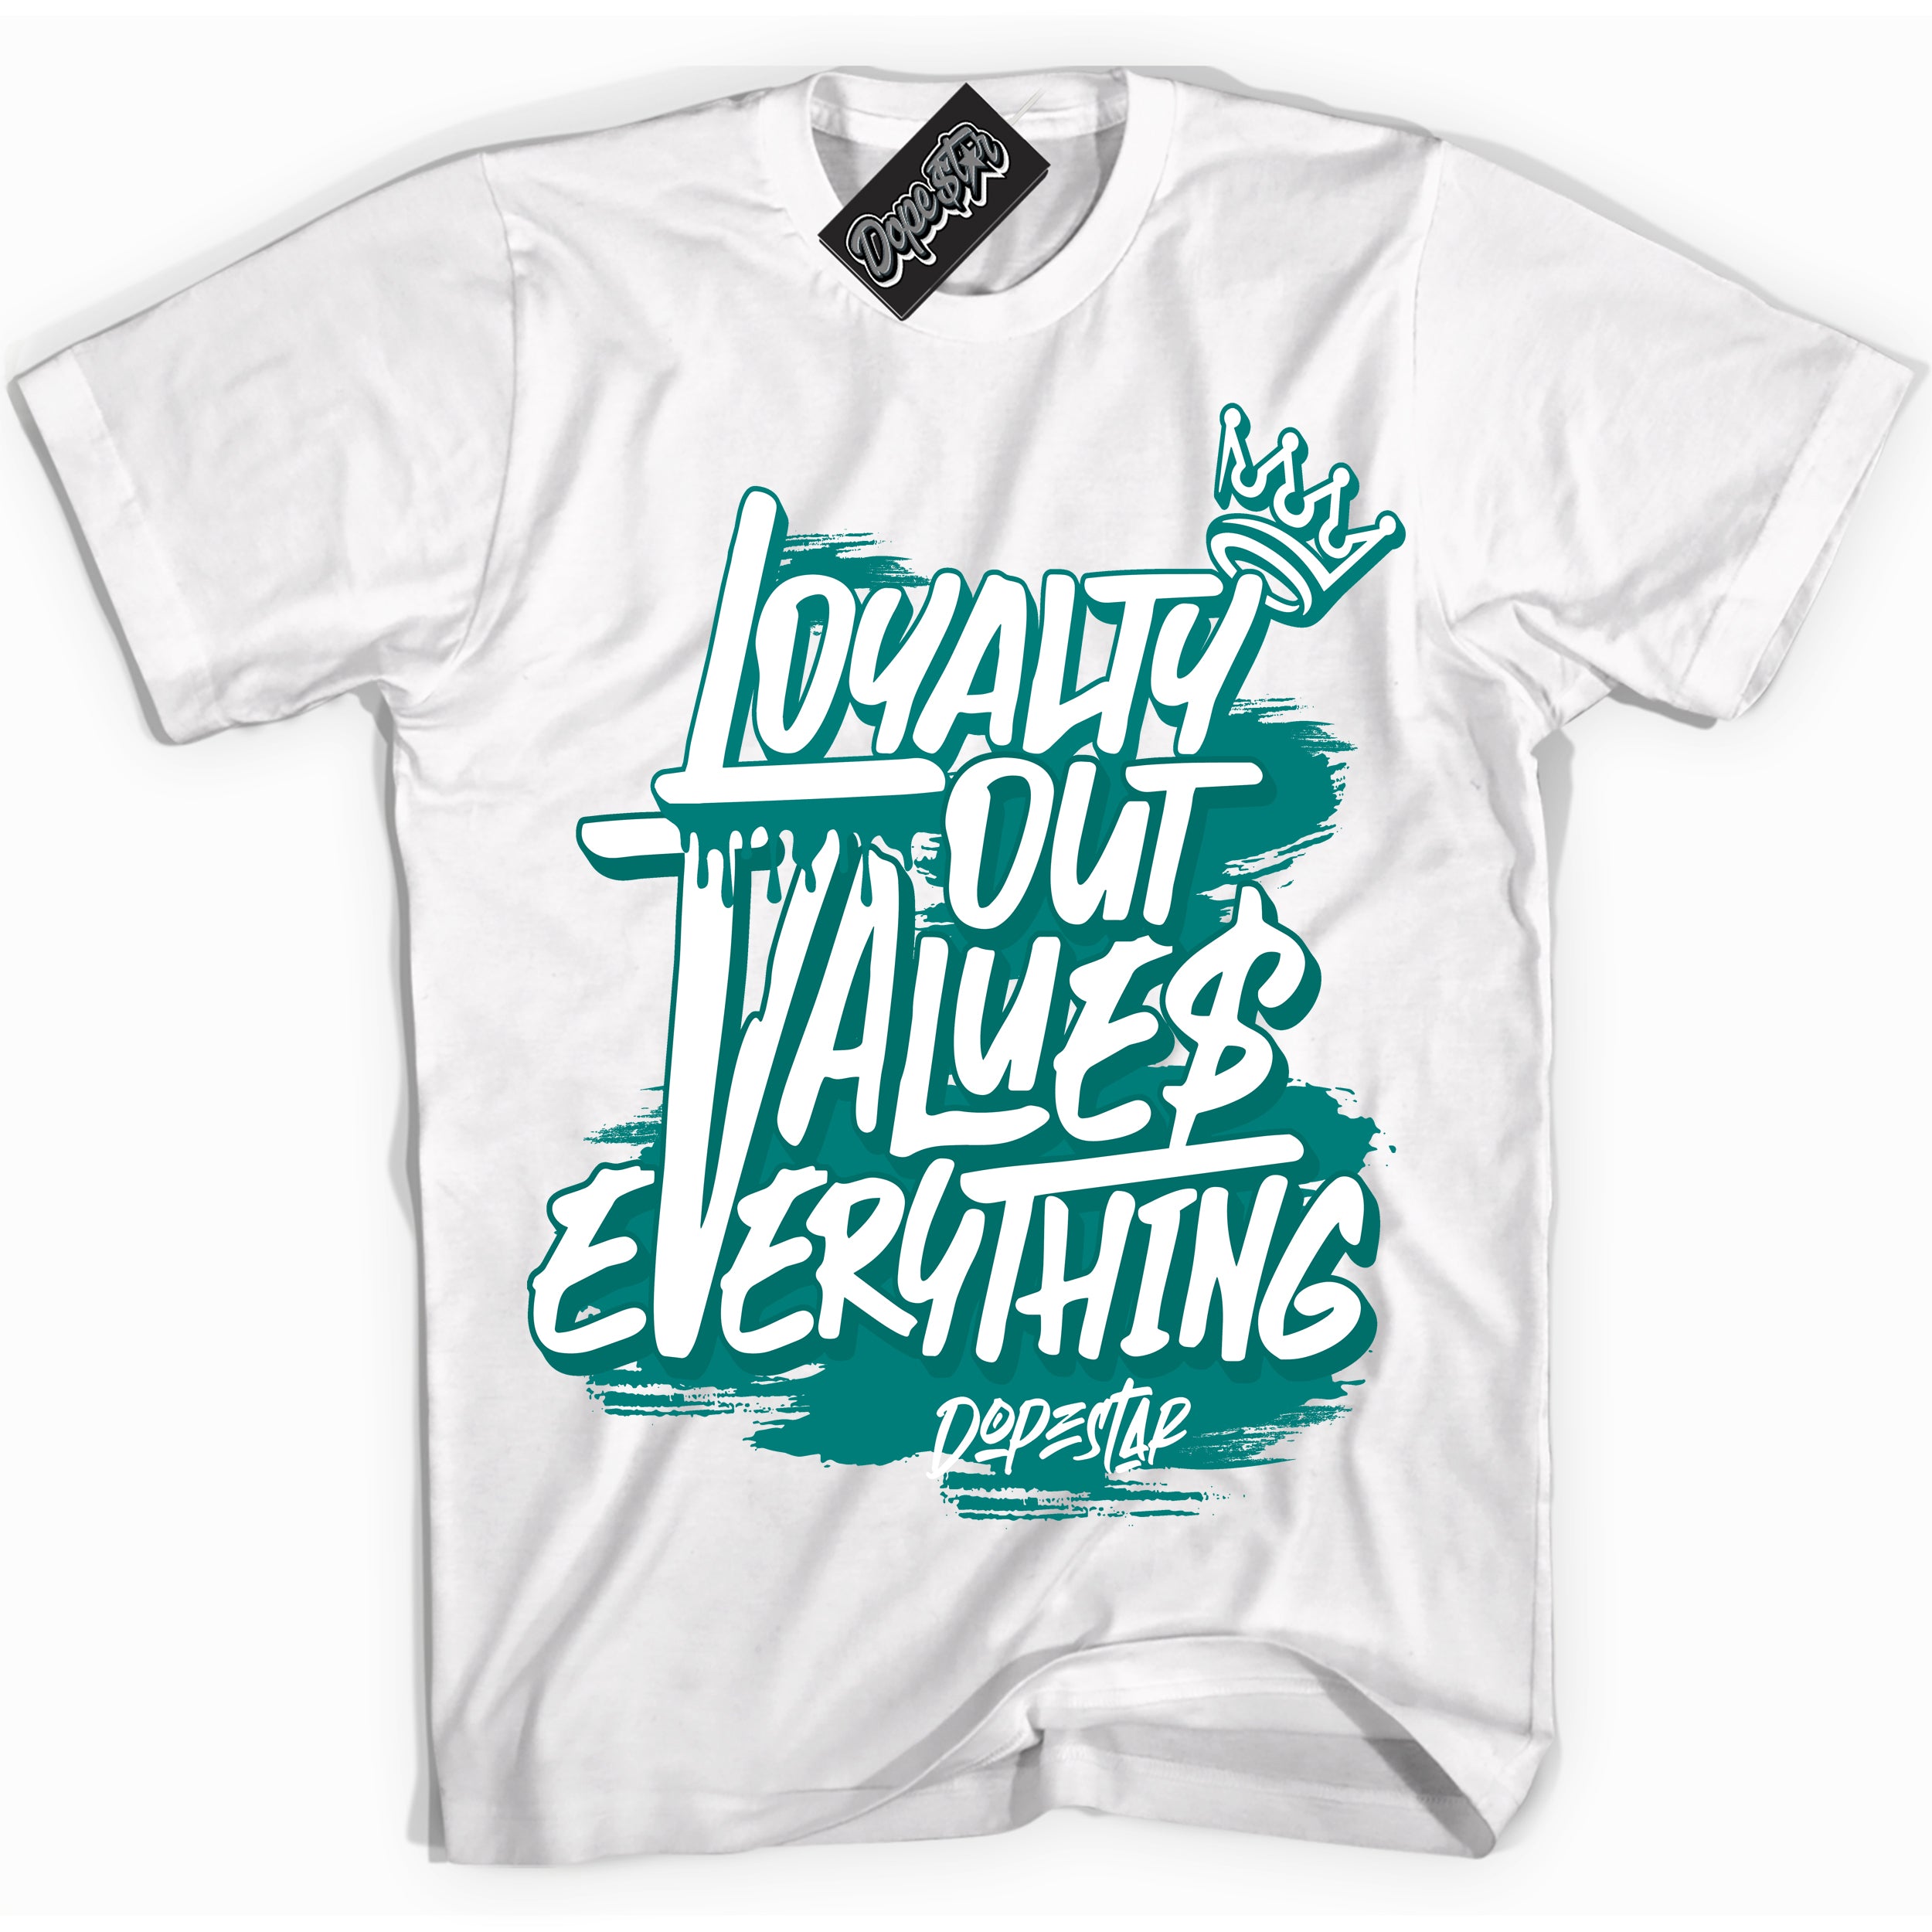 Cool White Shirt with “ Loyalty Out Values Everything” design that perfectly matches Protro Radiant Emerald 8s Sneakers.